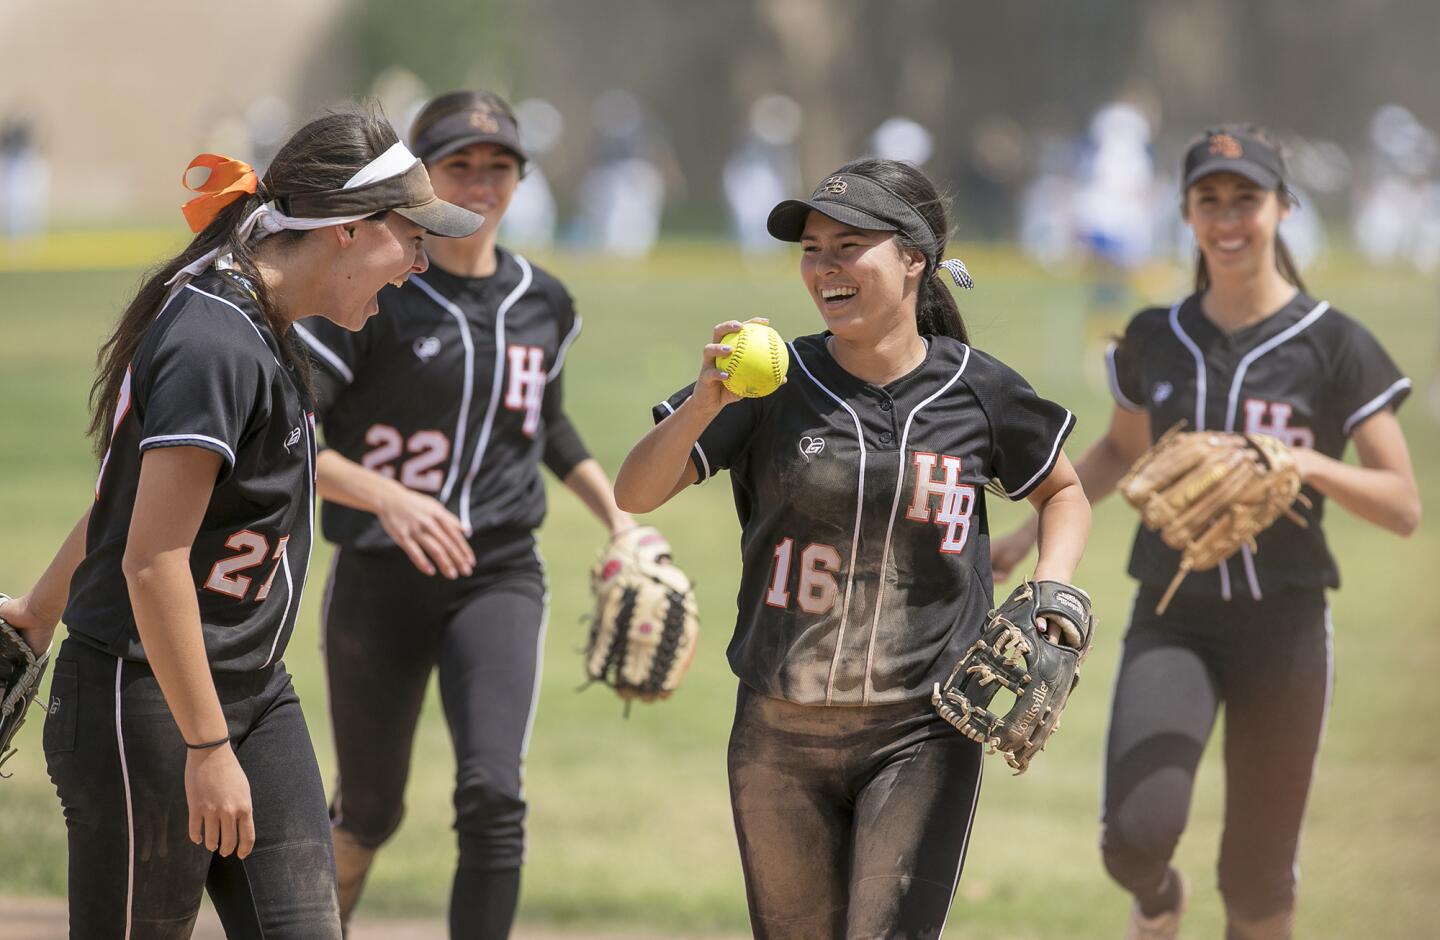 Huntington Beach's Megan Ryono (16) celebrates a great catch with Kelly Ryono, left, during a game in the Michelle Carew Classic against Vista Murrieta on Wednesday, April 4.